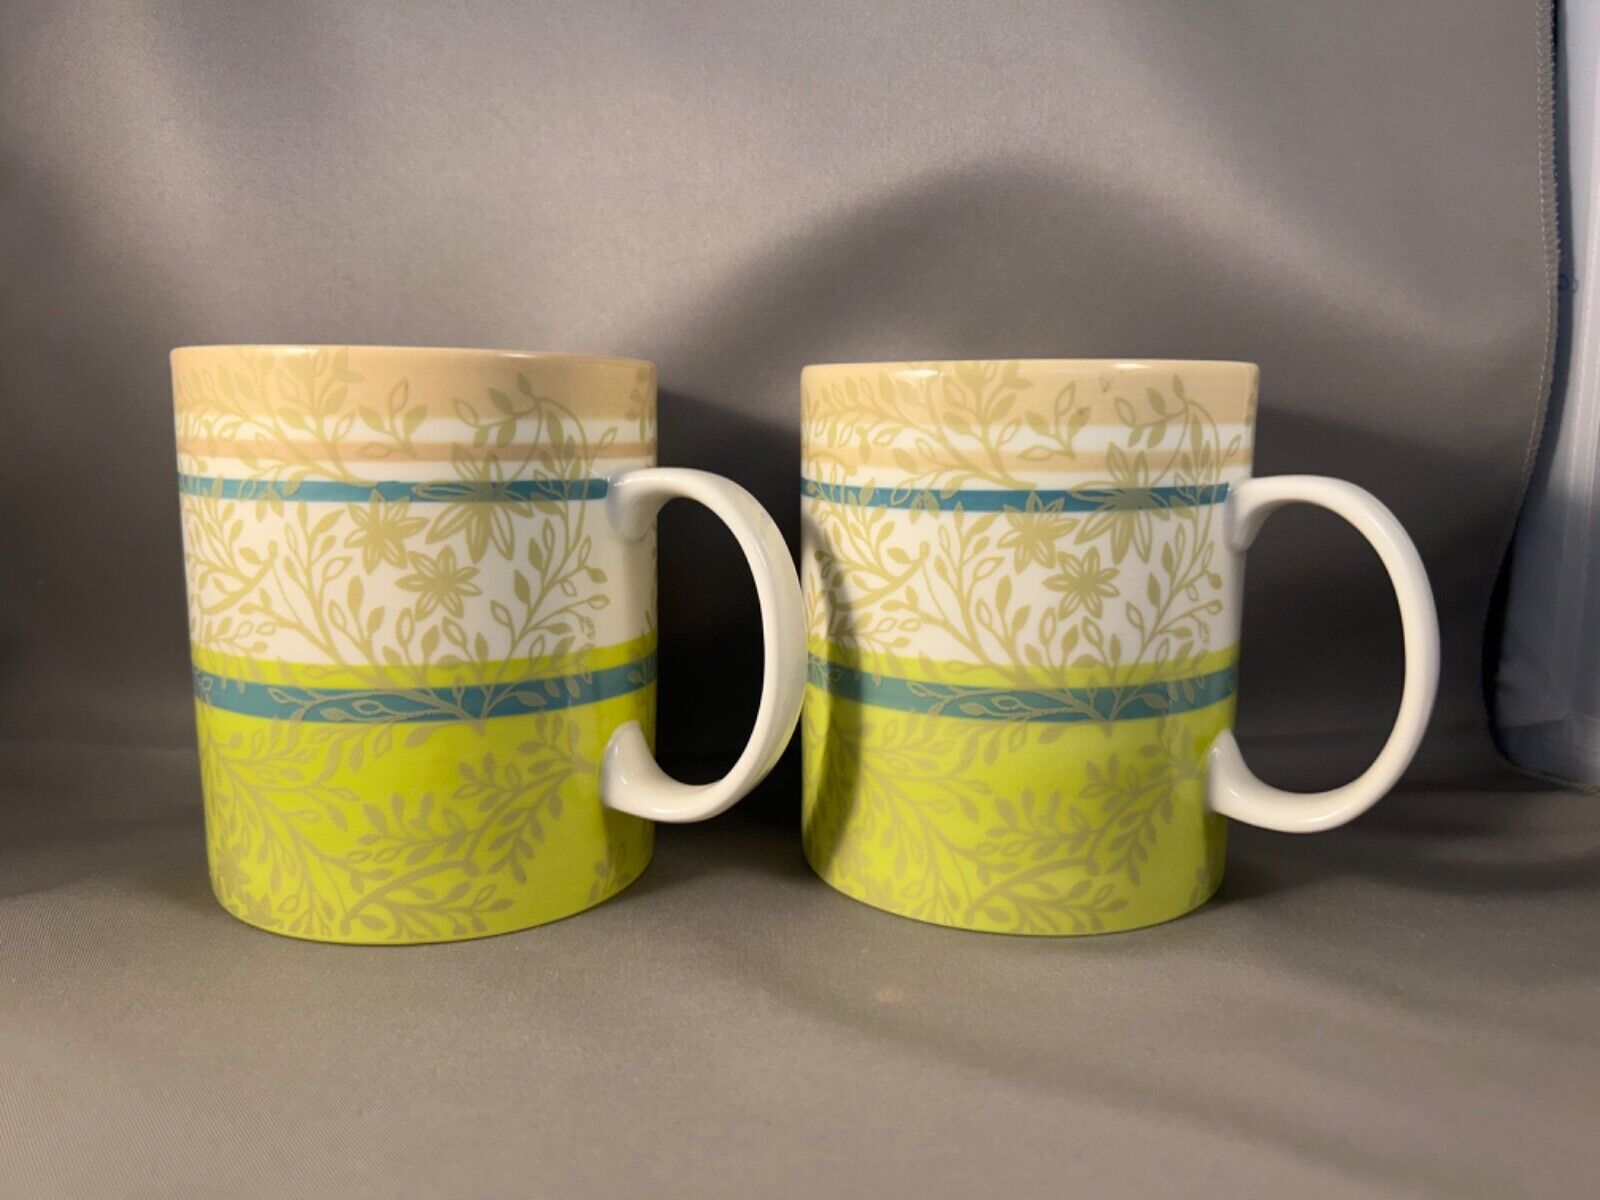 Starbucks 2008 Leaves and Floral Zen coffee mugs. 14 oz. Set of 2.